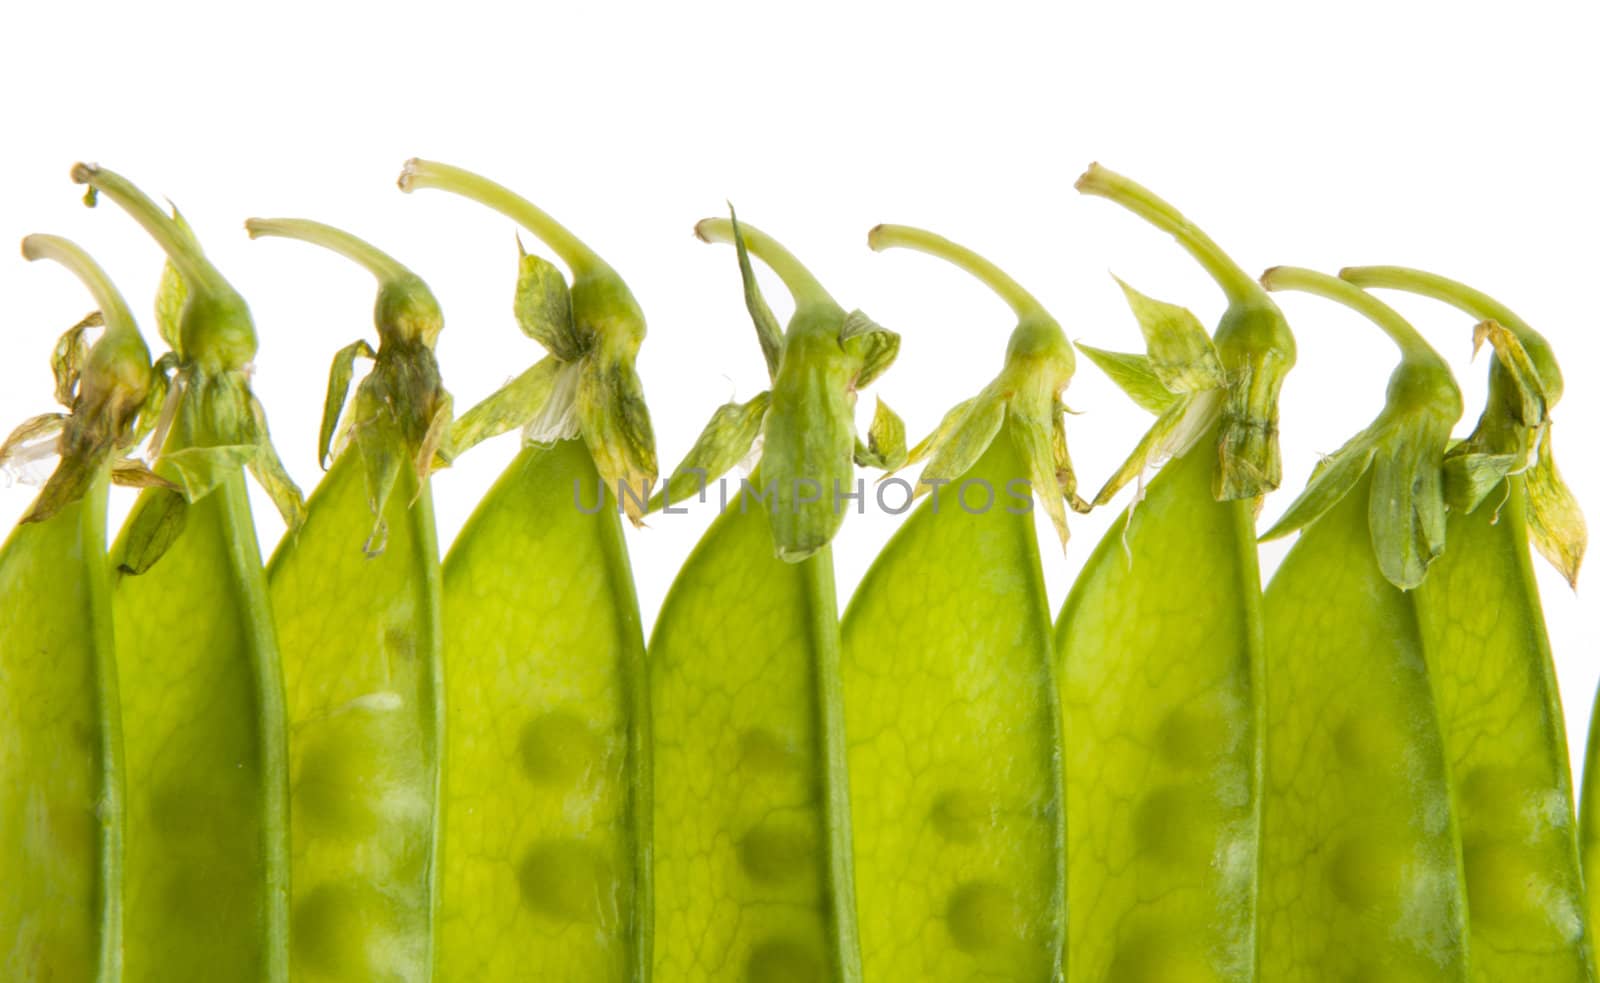 Pea Pods   by elemery